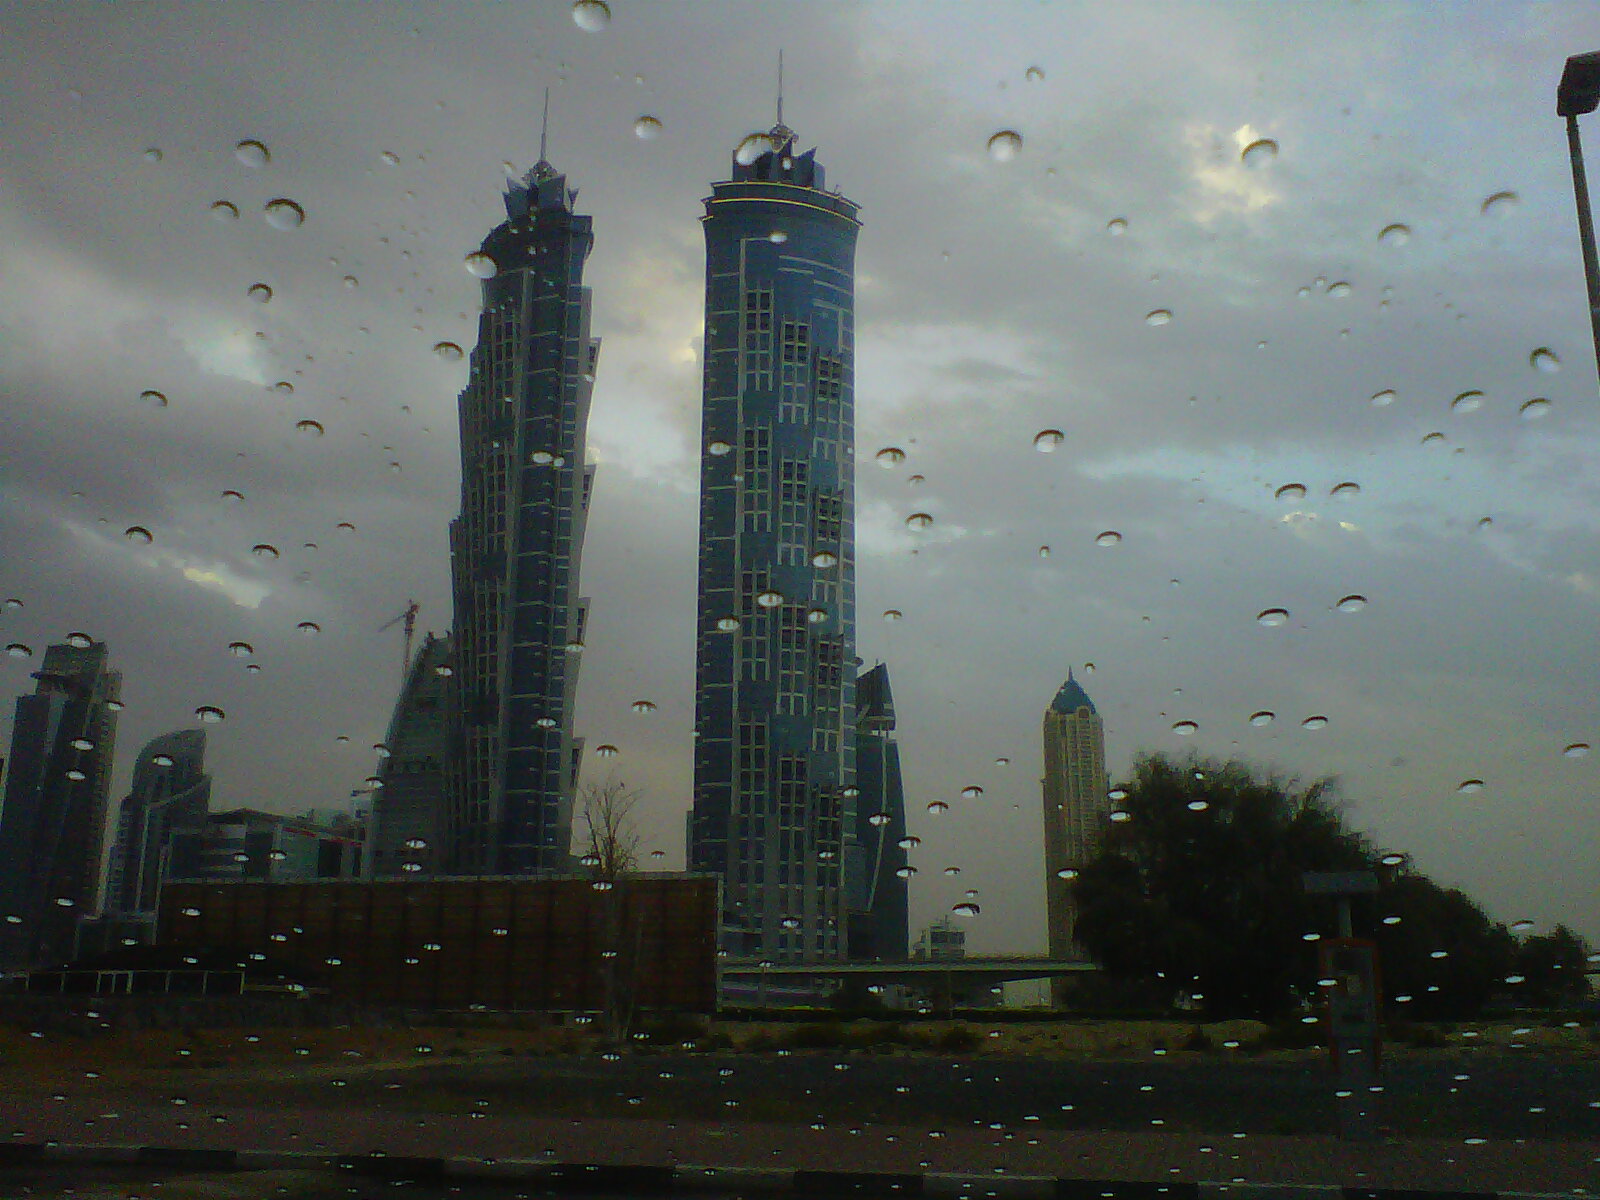 Dubai residents greeted by early morning rain on Sunday. (Image contributed by Emirates 24|7 Reader Jogiraj Sikidar)